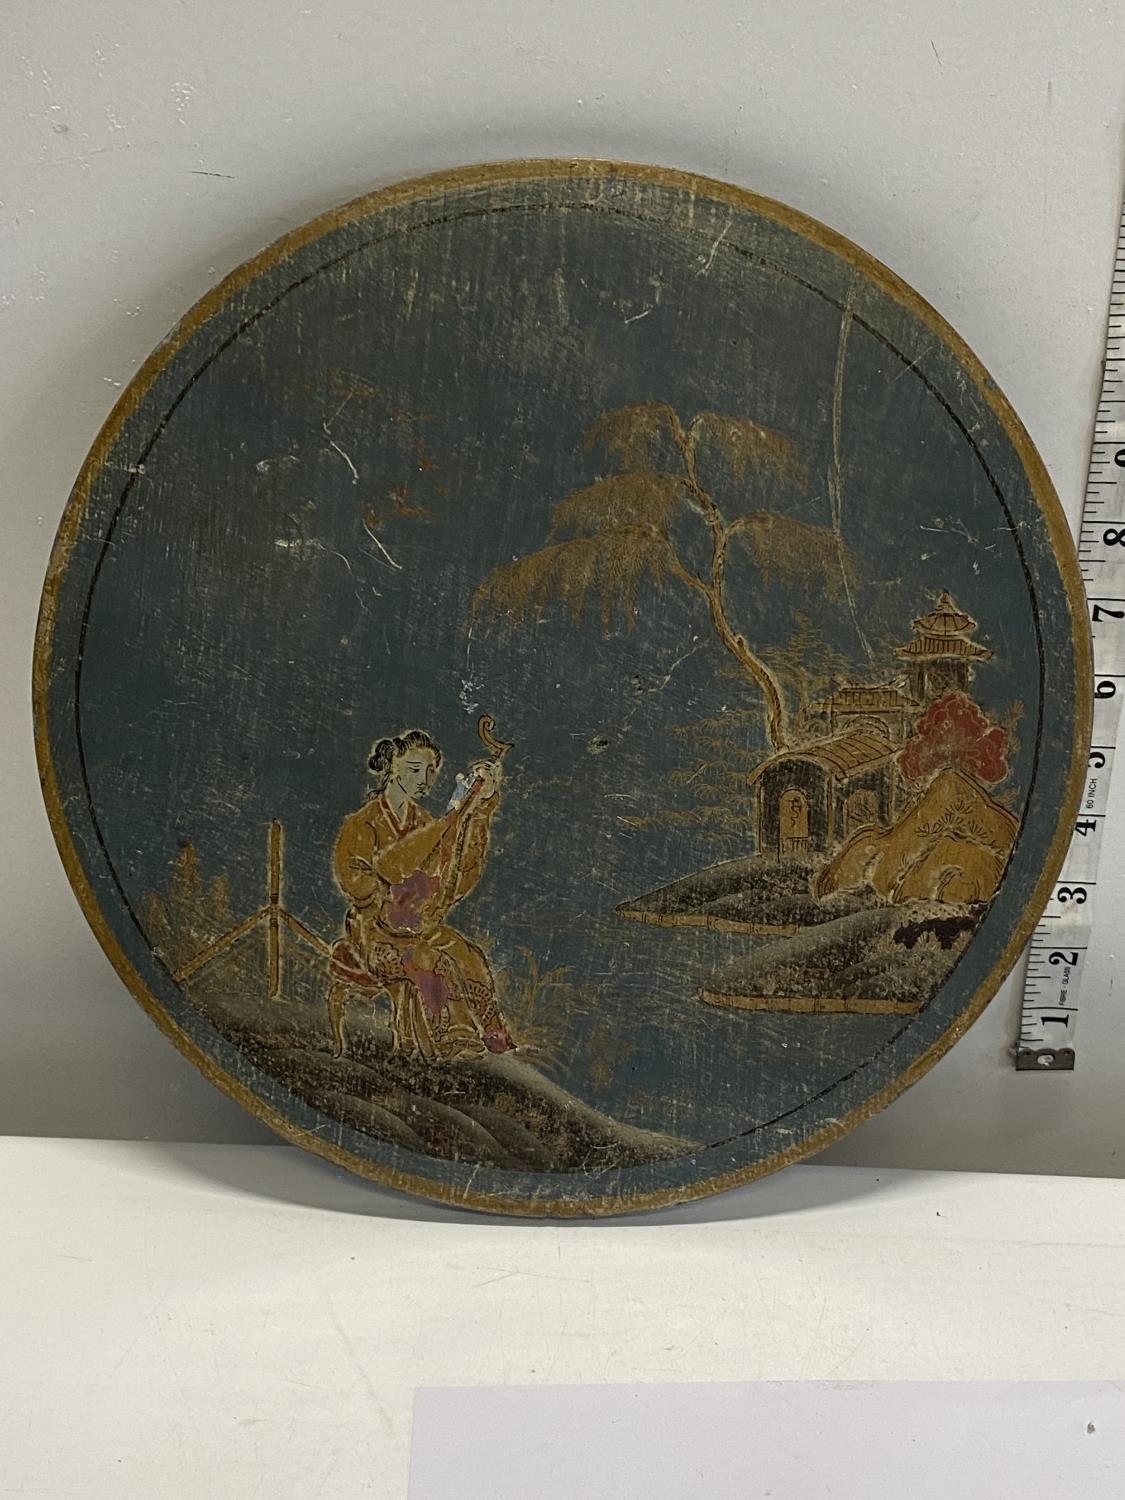 A Chinese circular gold gilt painting on wood